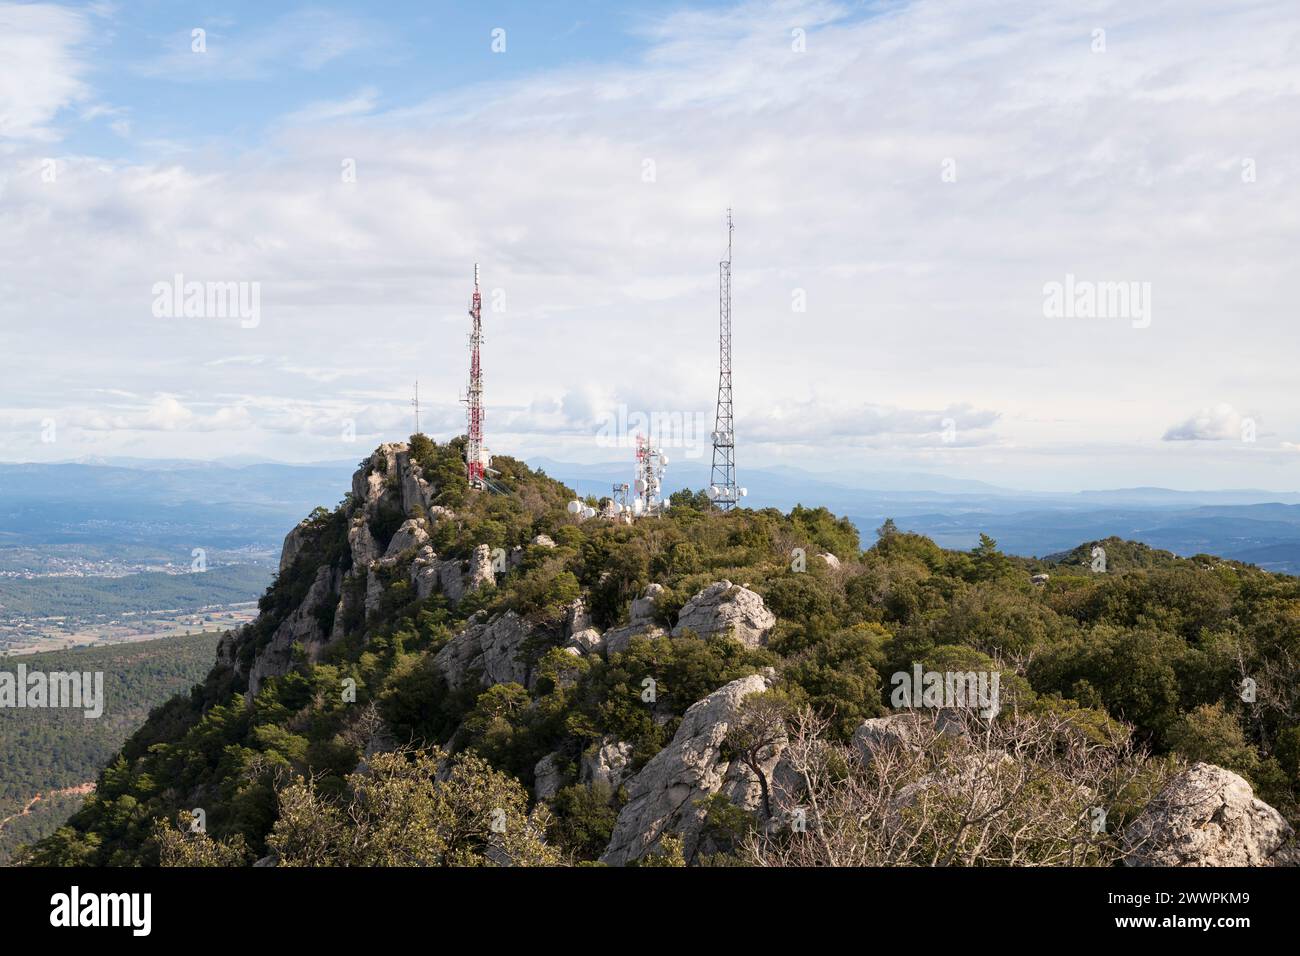 Telecommunications antenna pylons atop Loube mountain, La Roquebrussanne, Department of Var, South of France Stock Photo